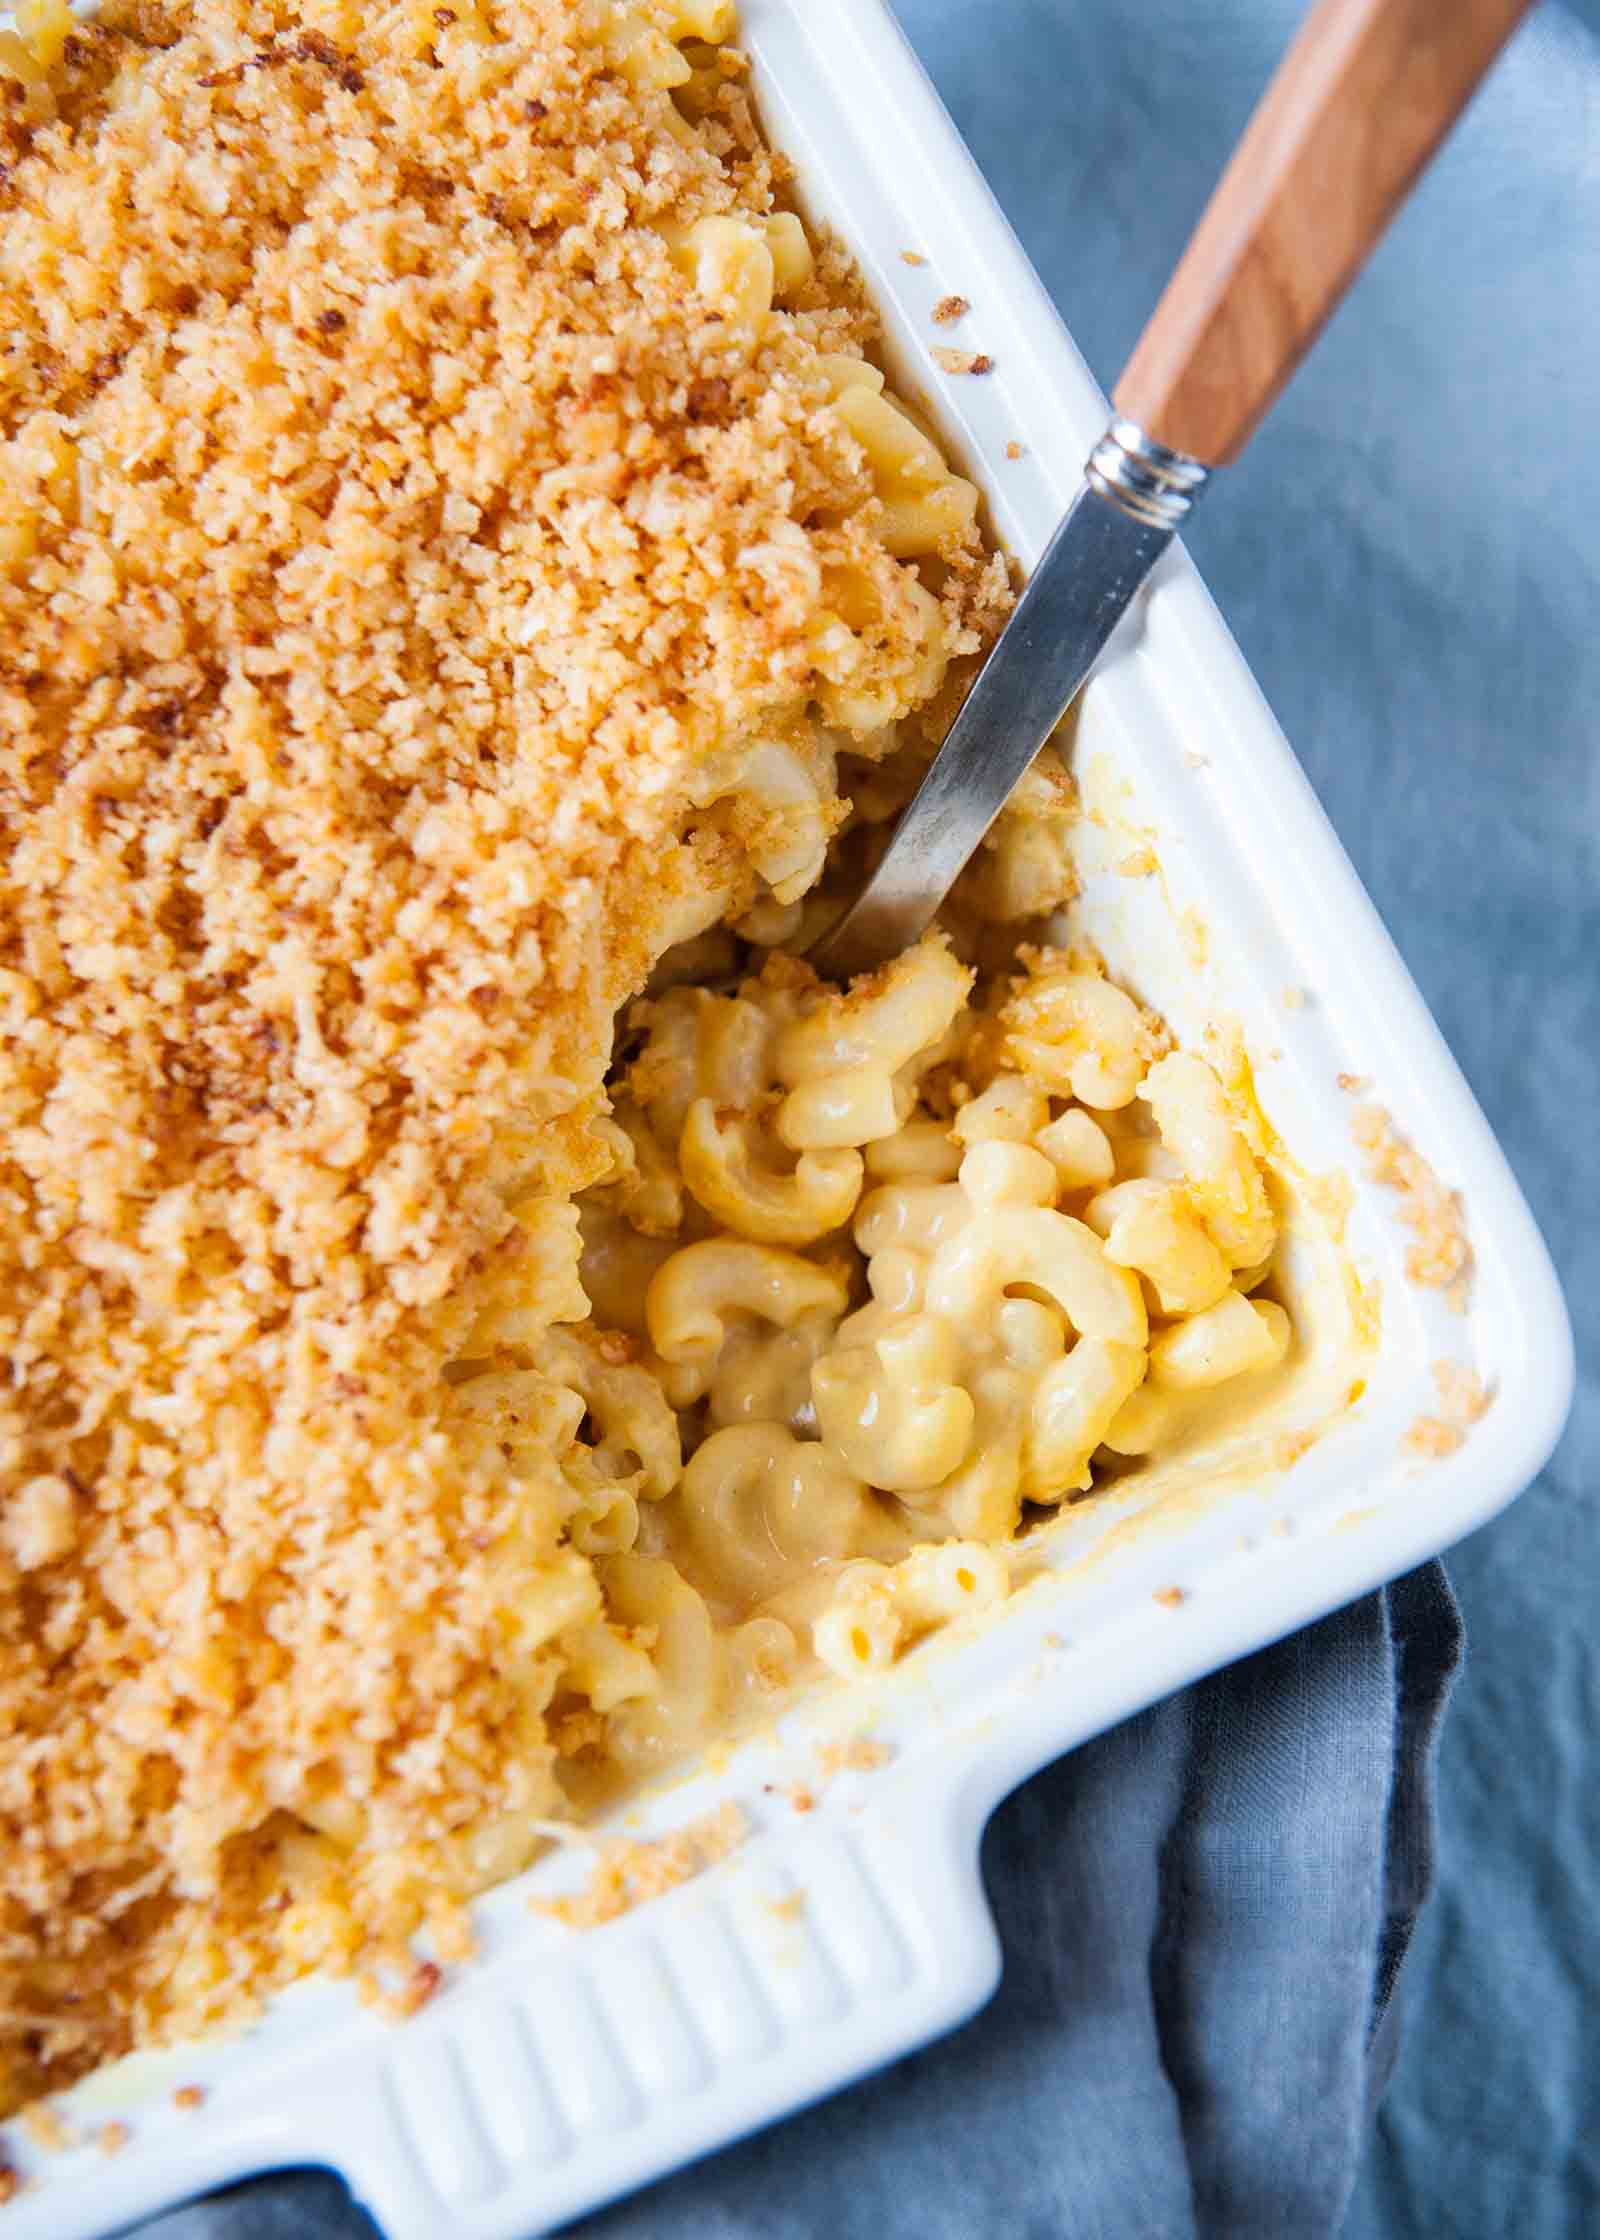 Baked Macaroni And Cheese Recipes With Cream Cheese
 Creamy Baked Mac and Cheese Recipe